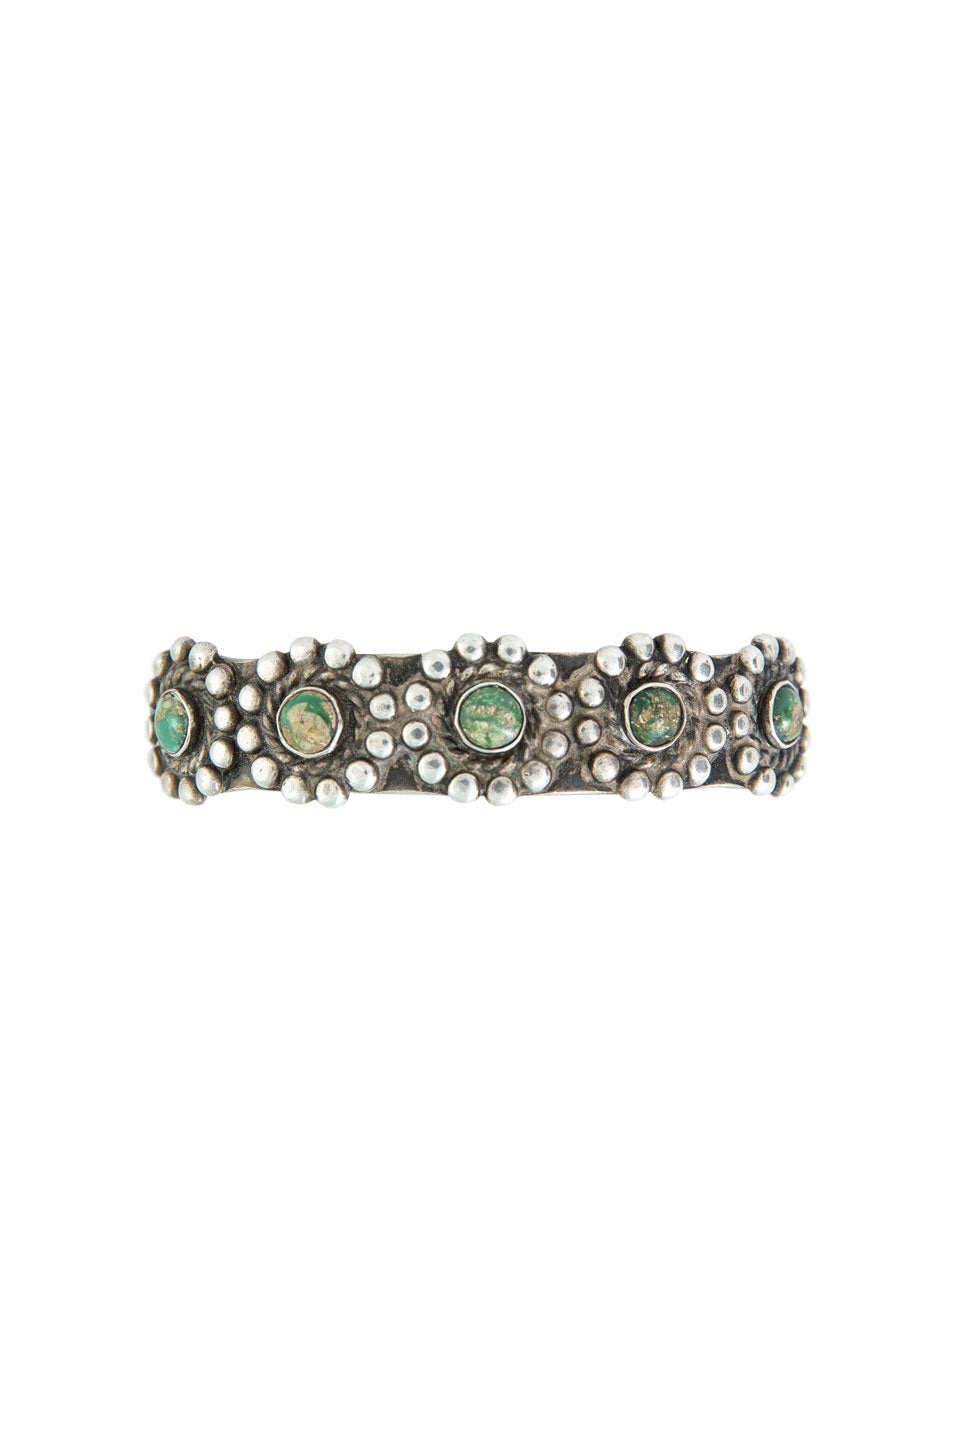 Cuff, Turquoise, Fred Harvey, Vintage, 2435